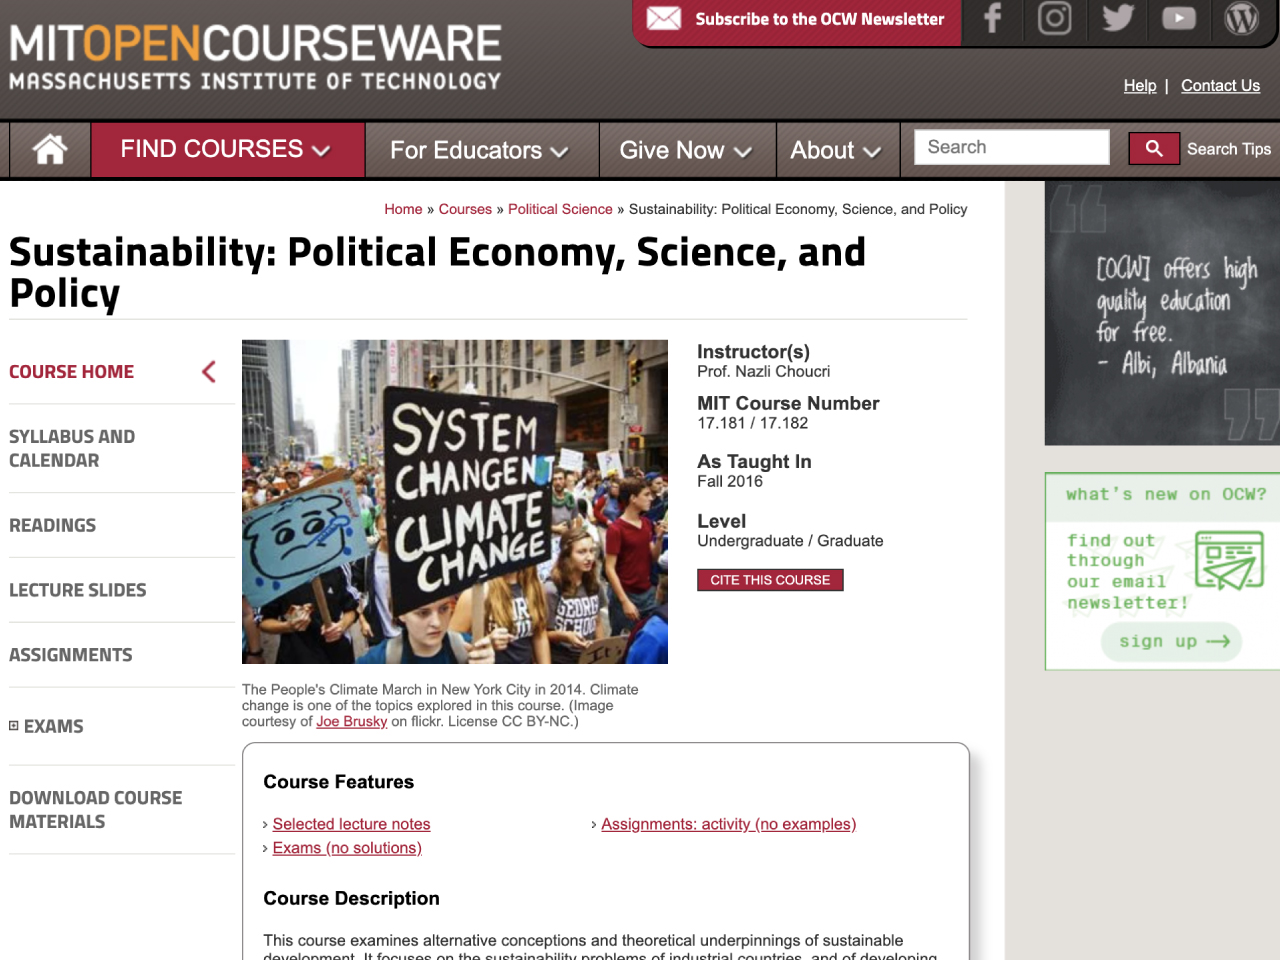 Sustainability: Political Economy, Science, and Policy